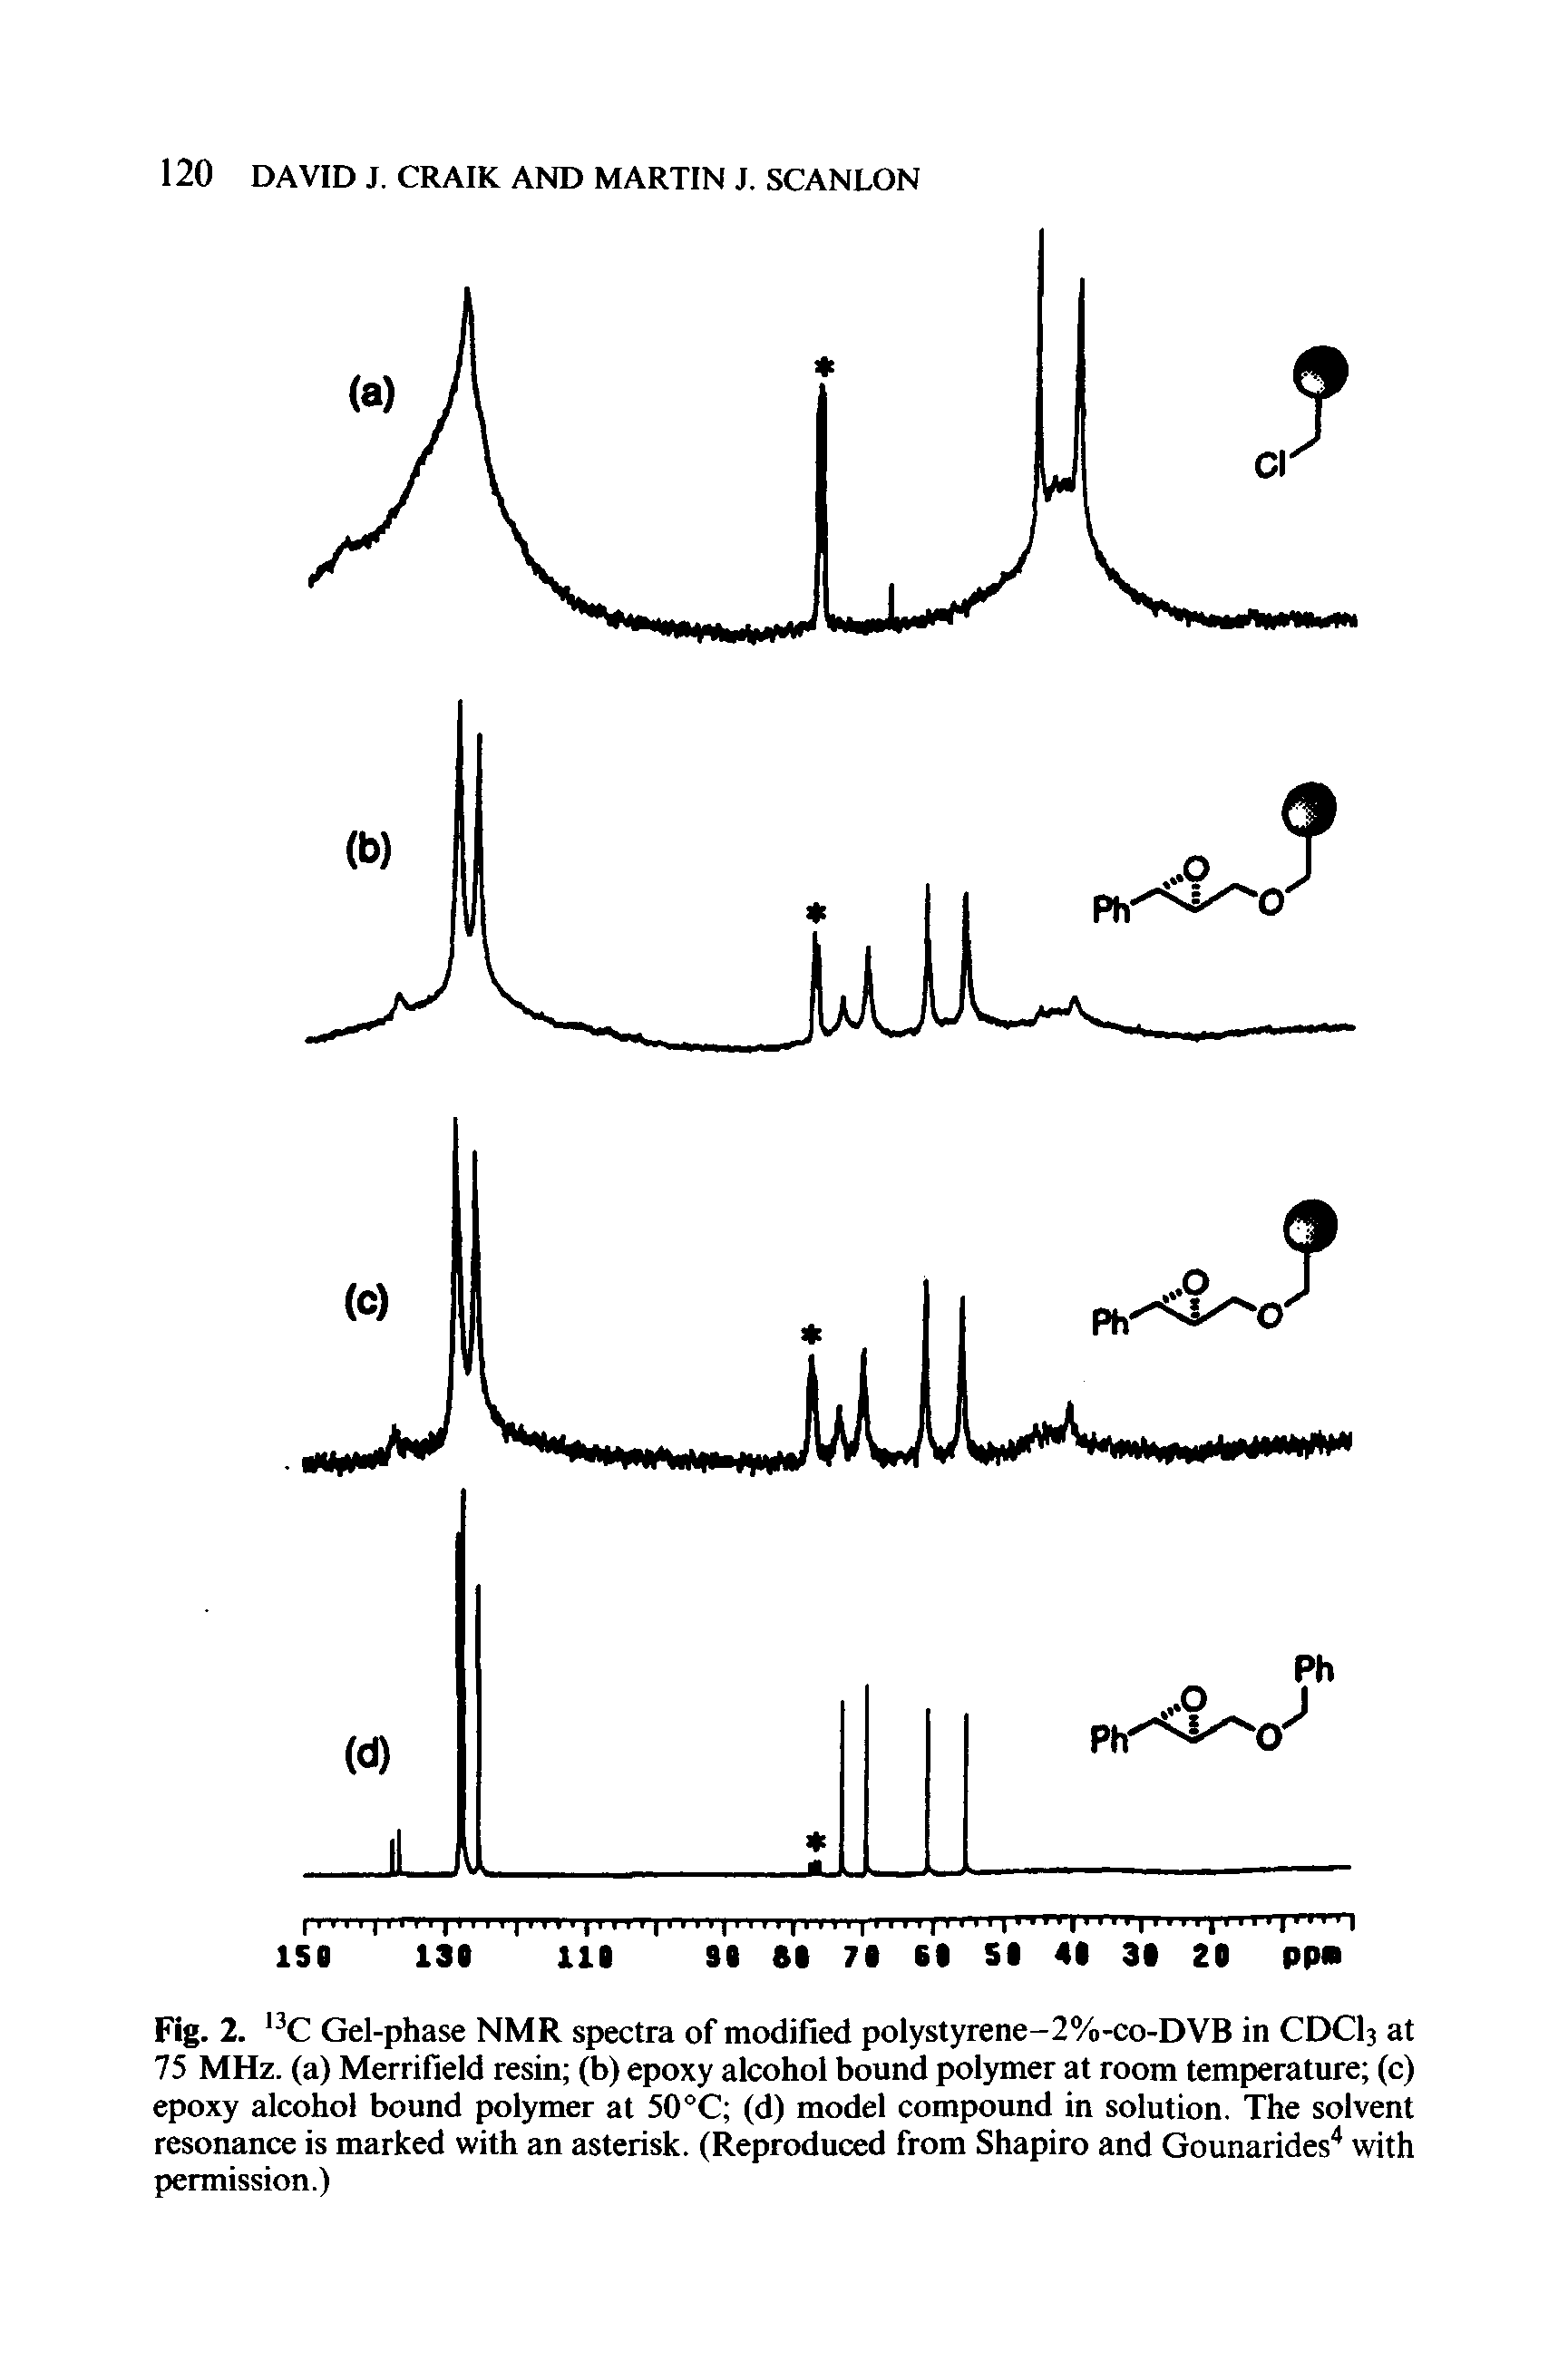 Fig. 2. 13C Gel-phase NMR spectra of modified polystyrene-2%-co-DVB in CDCI3 at 75 MHz. (a) Merrifield resin (b) epoxy alcohol bound polymer at room temperature (c) epoxy alcohol bound polymer at 50°C (d) model compound in solution. The solvent resonance is marked with an asterisk. (Reproduced from Shapiro and Gounarides4 with permission.)...